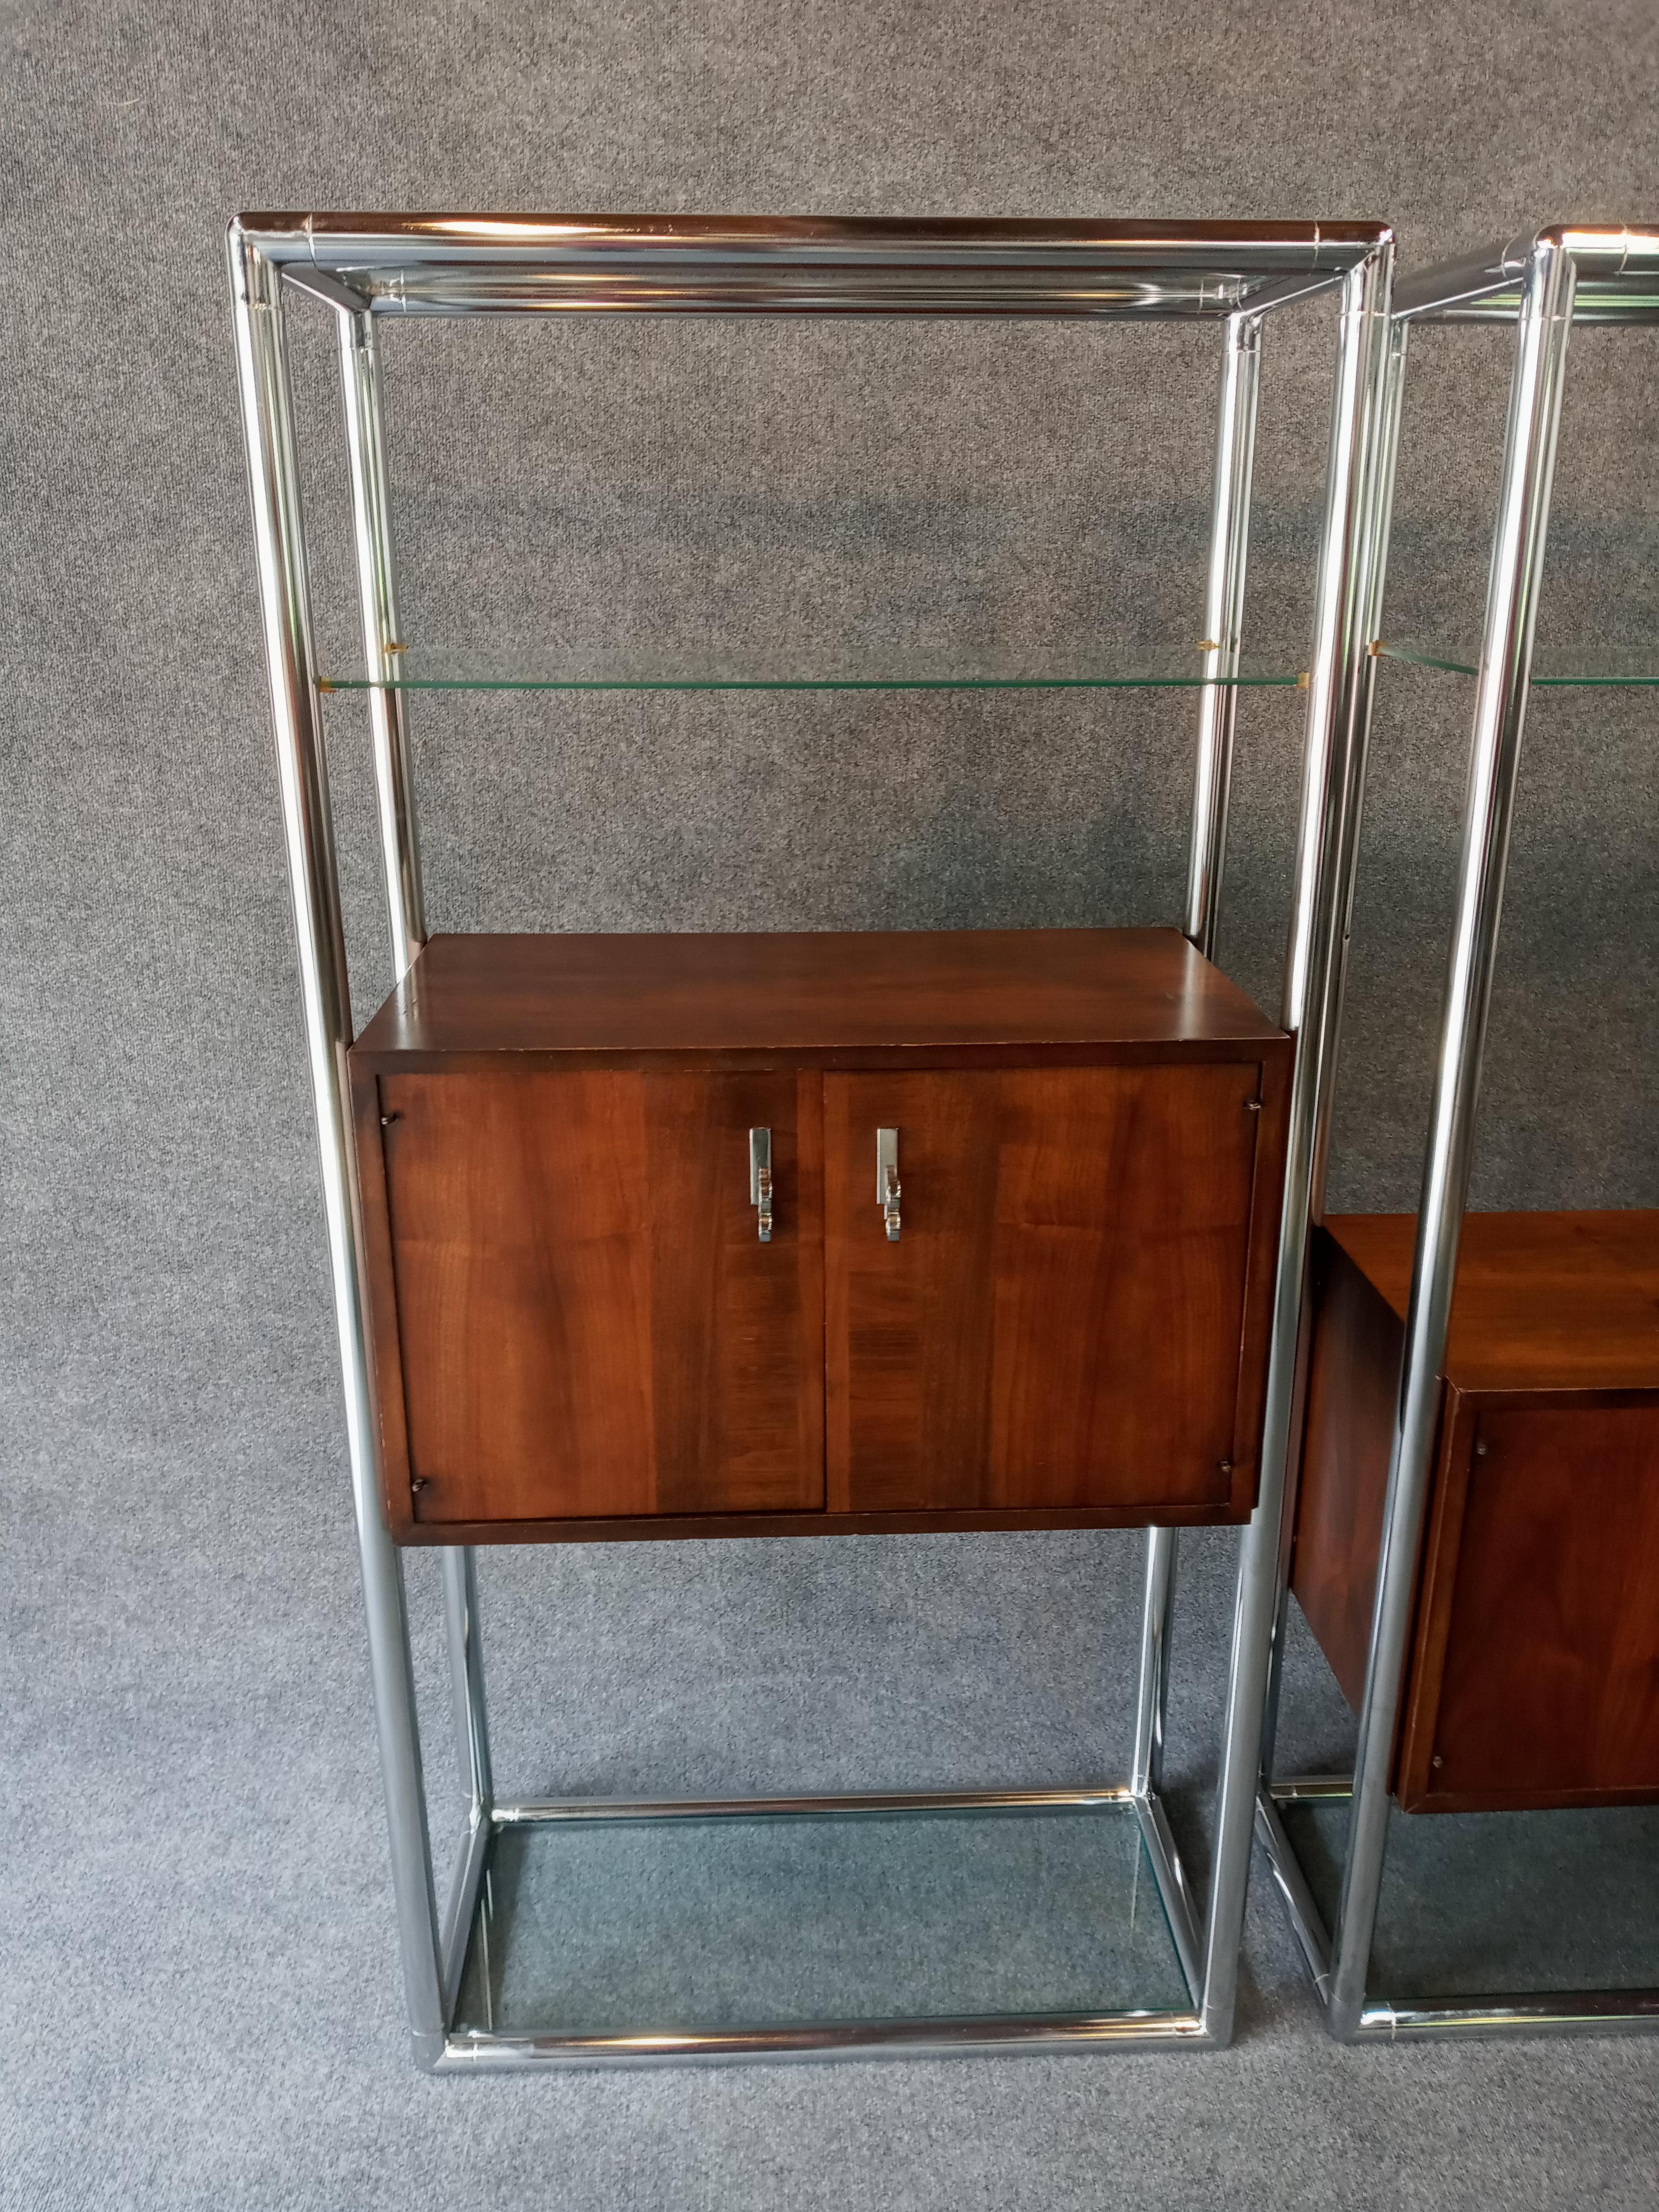 Pair of elegant and practical chrome framed and walnut cased etageres by Lane, Each with adjustable glass shelving. Very well made, sturdy and stable. 

The chrome is clean and bright. The satin sheen finish on the walnut is original with only minor